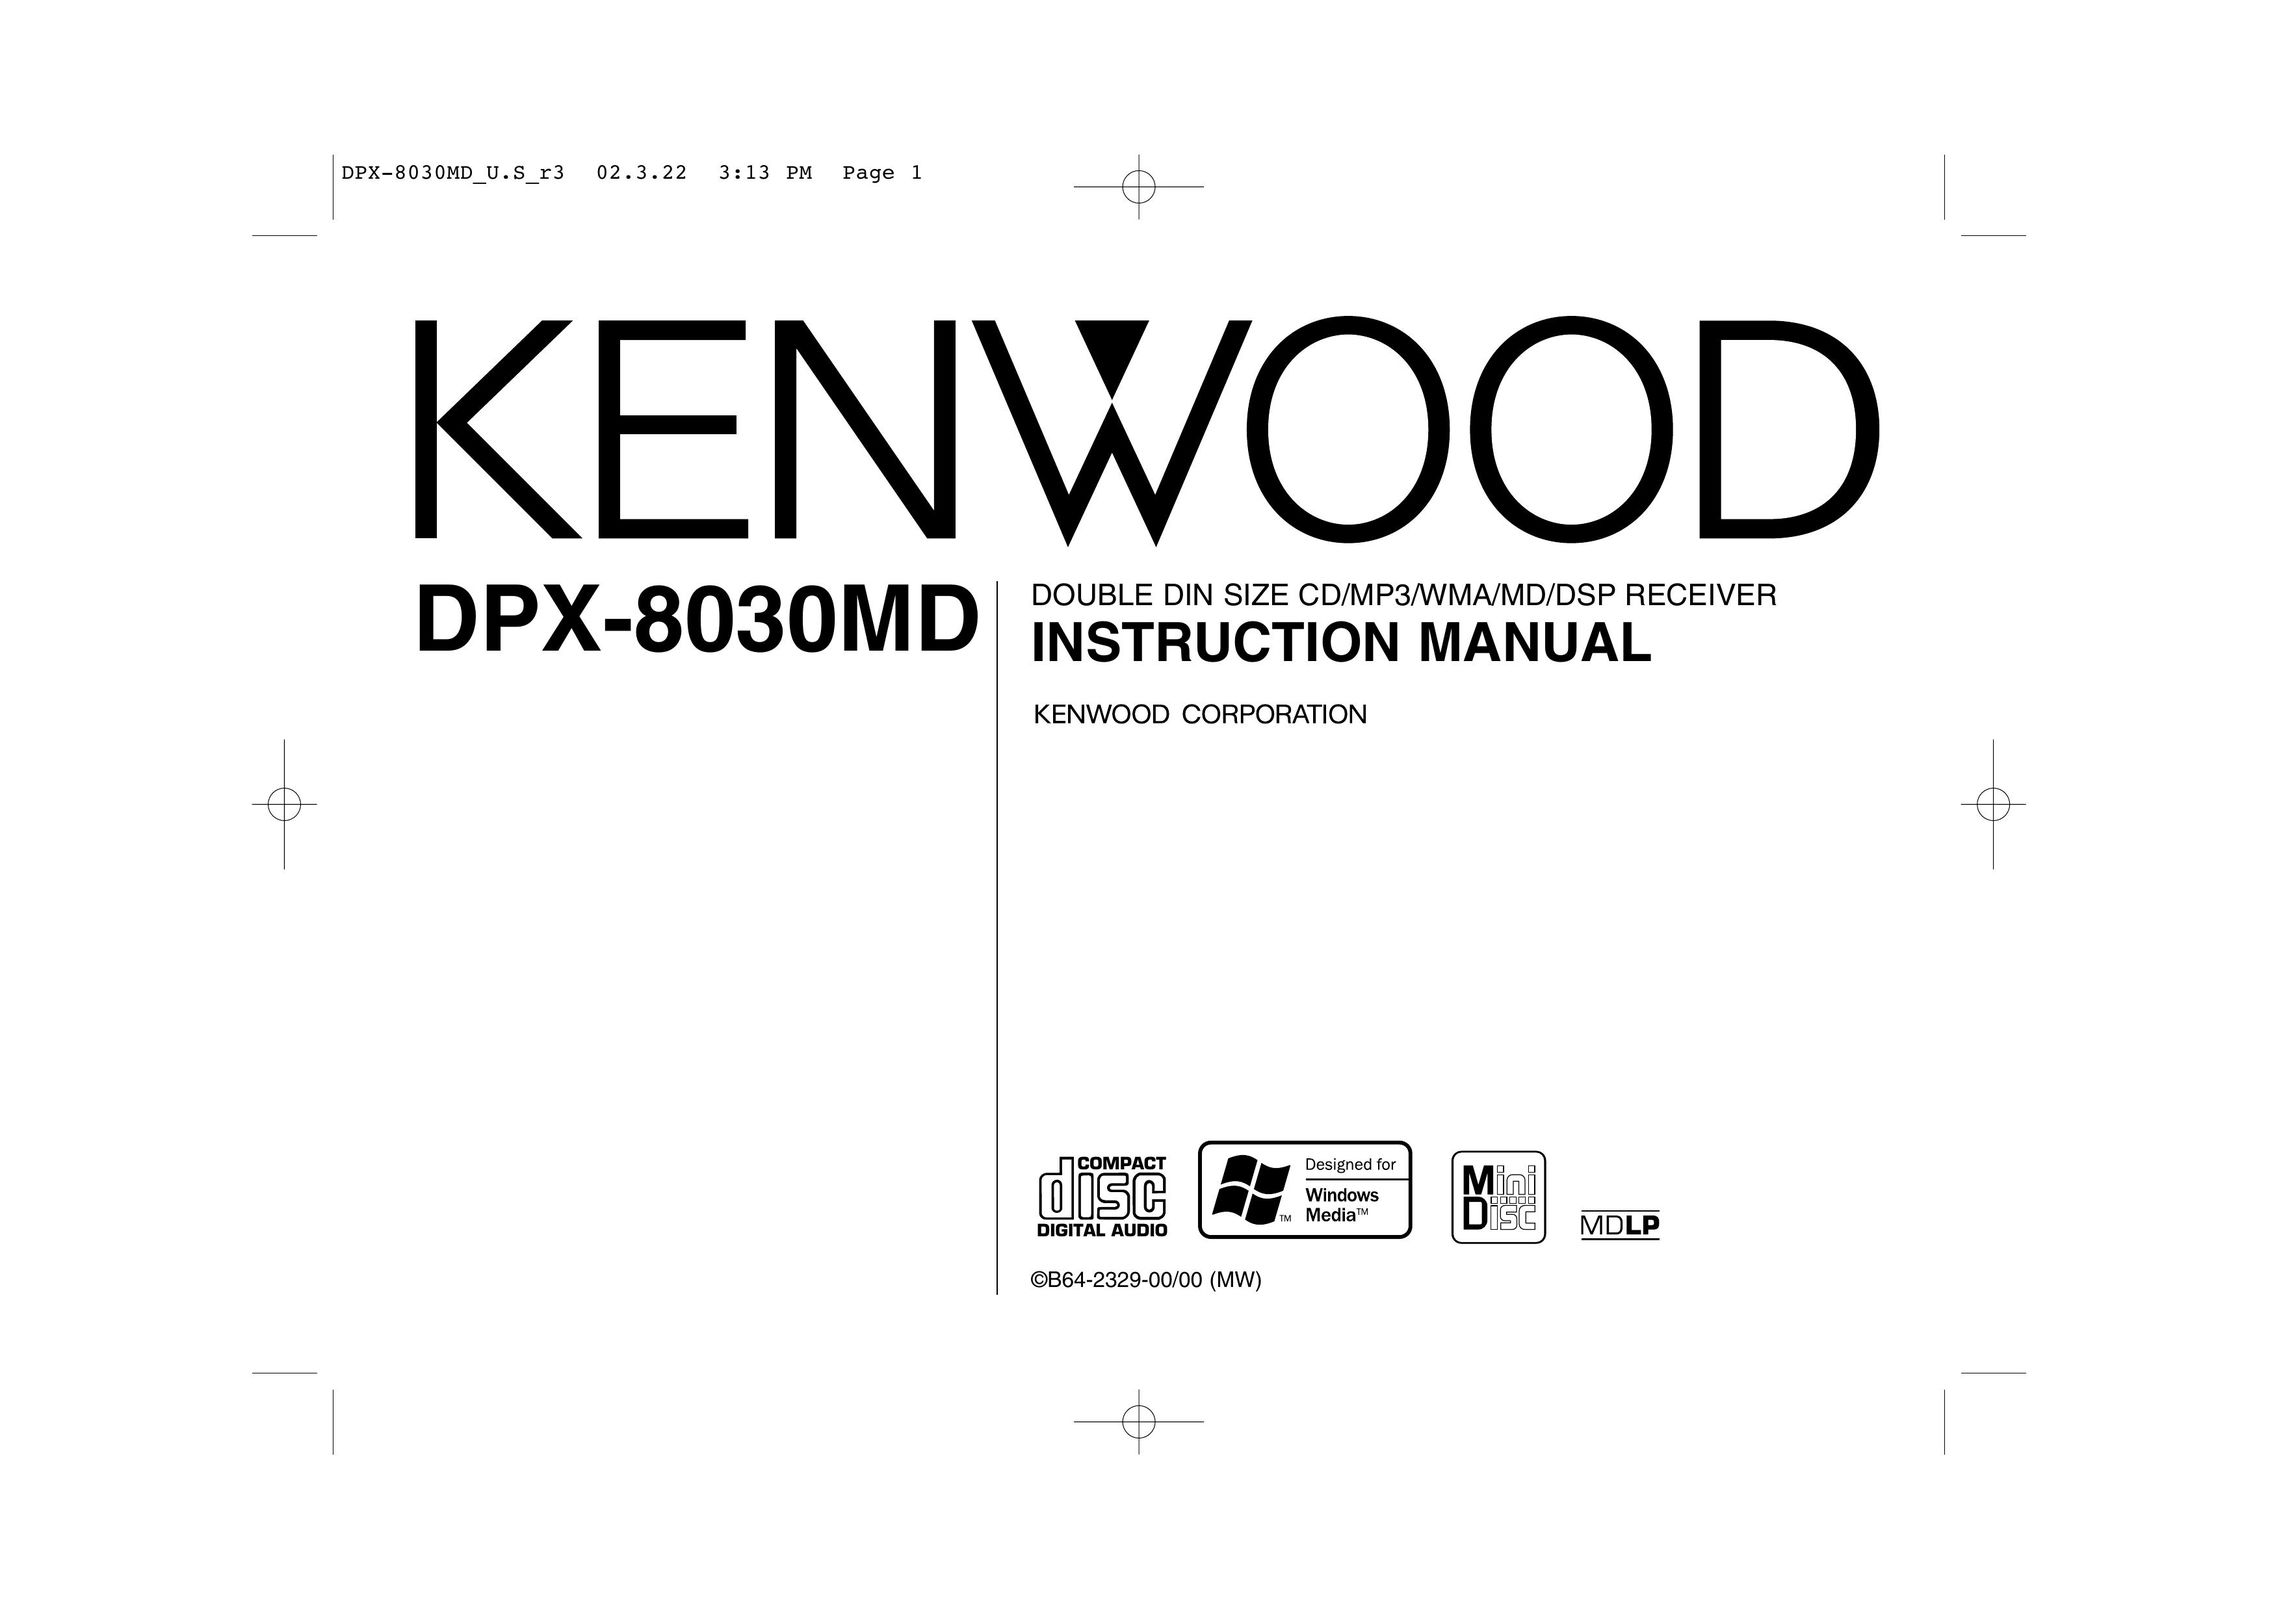 Kenwood DPX-8030MD Car Stereo System User Manual